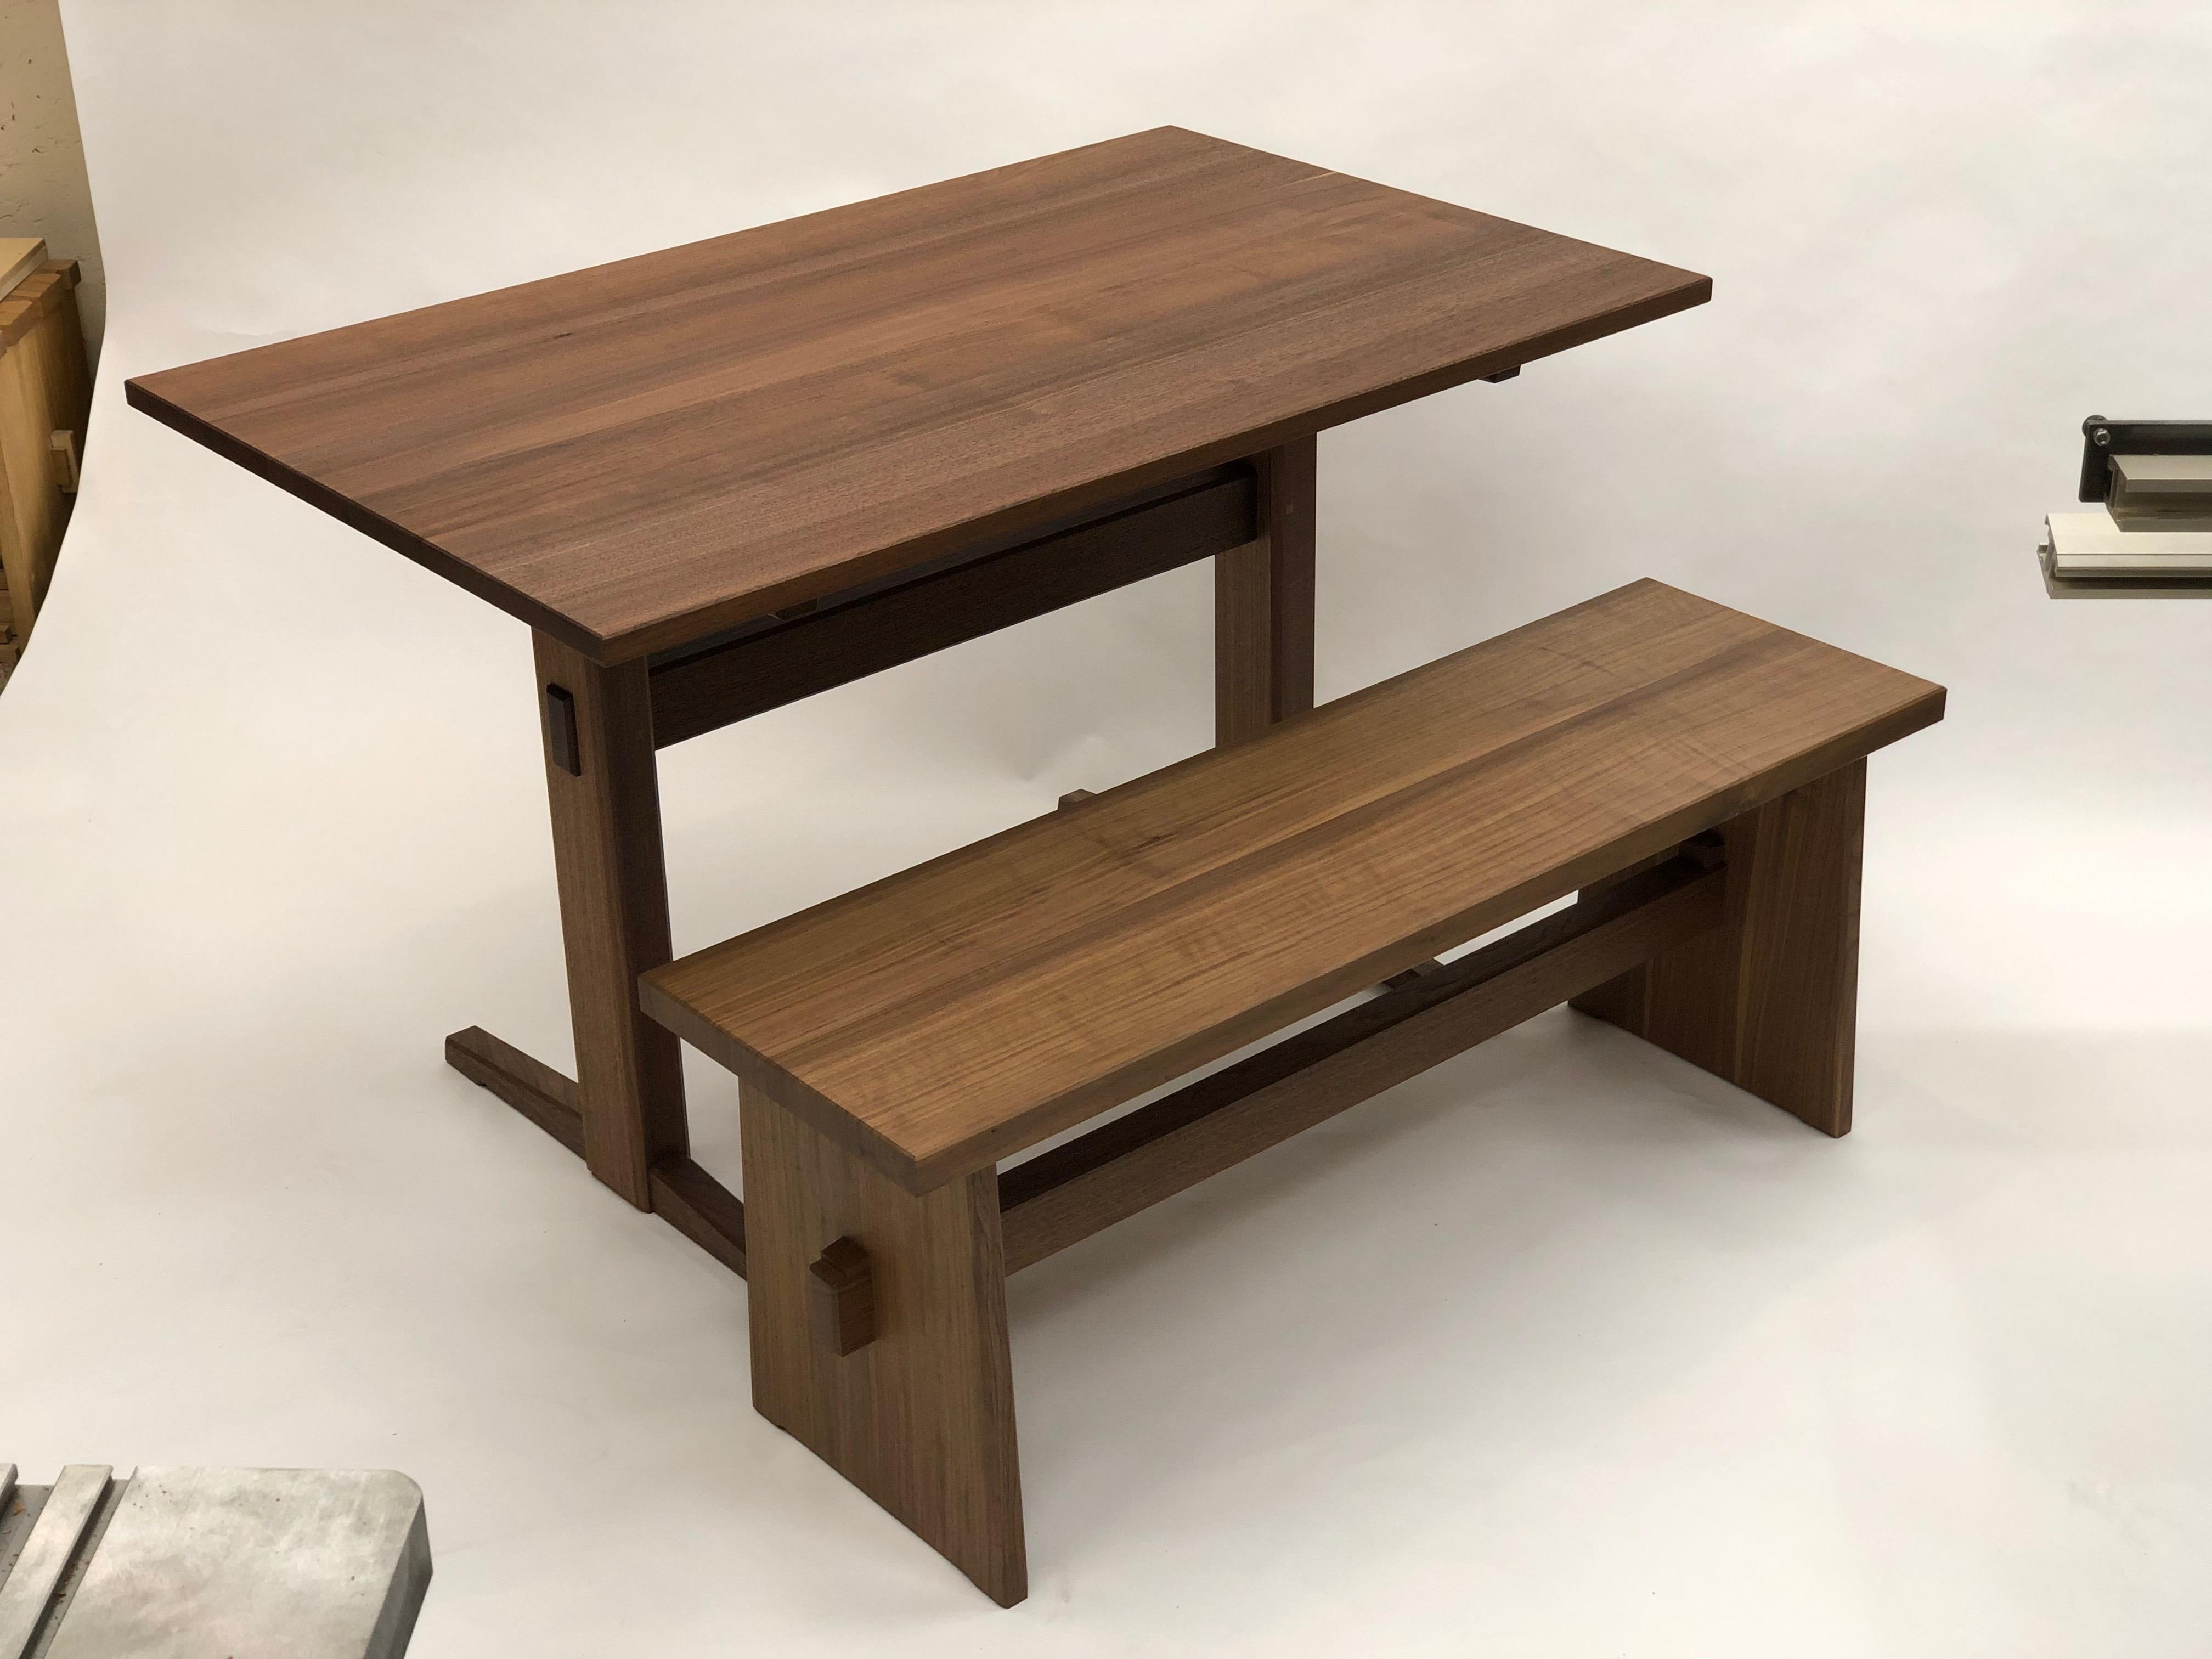 Trestle Base Dining Table in Quartersawn Walnut by Brian Holcombe In New Condition For Sale In Princeton, NJ